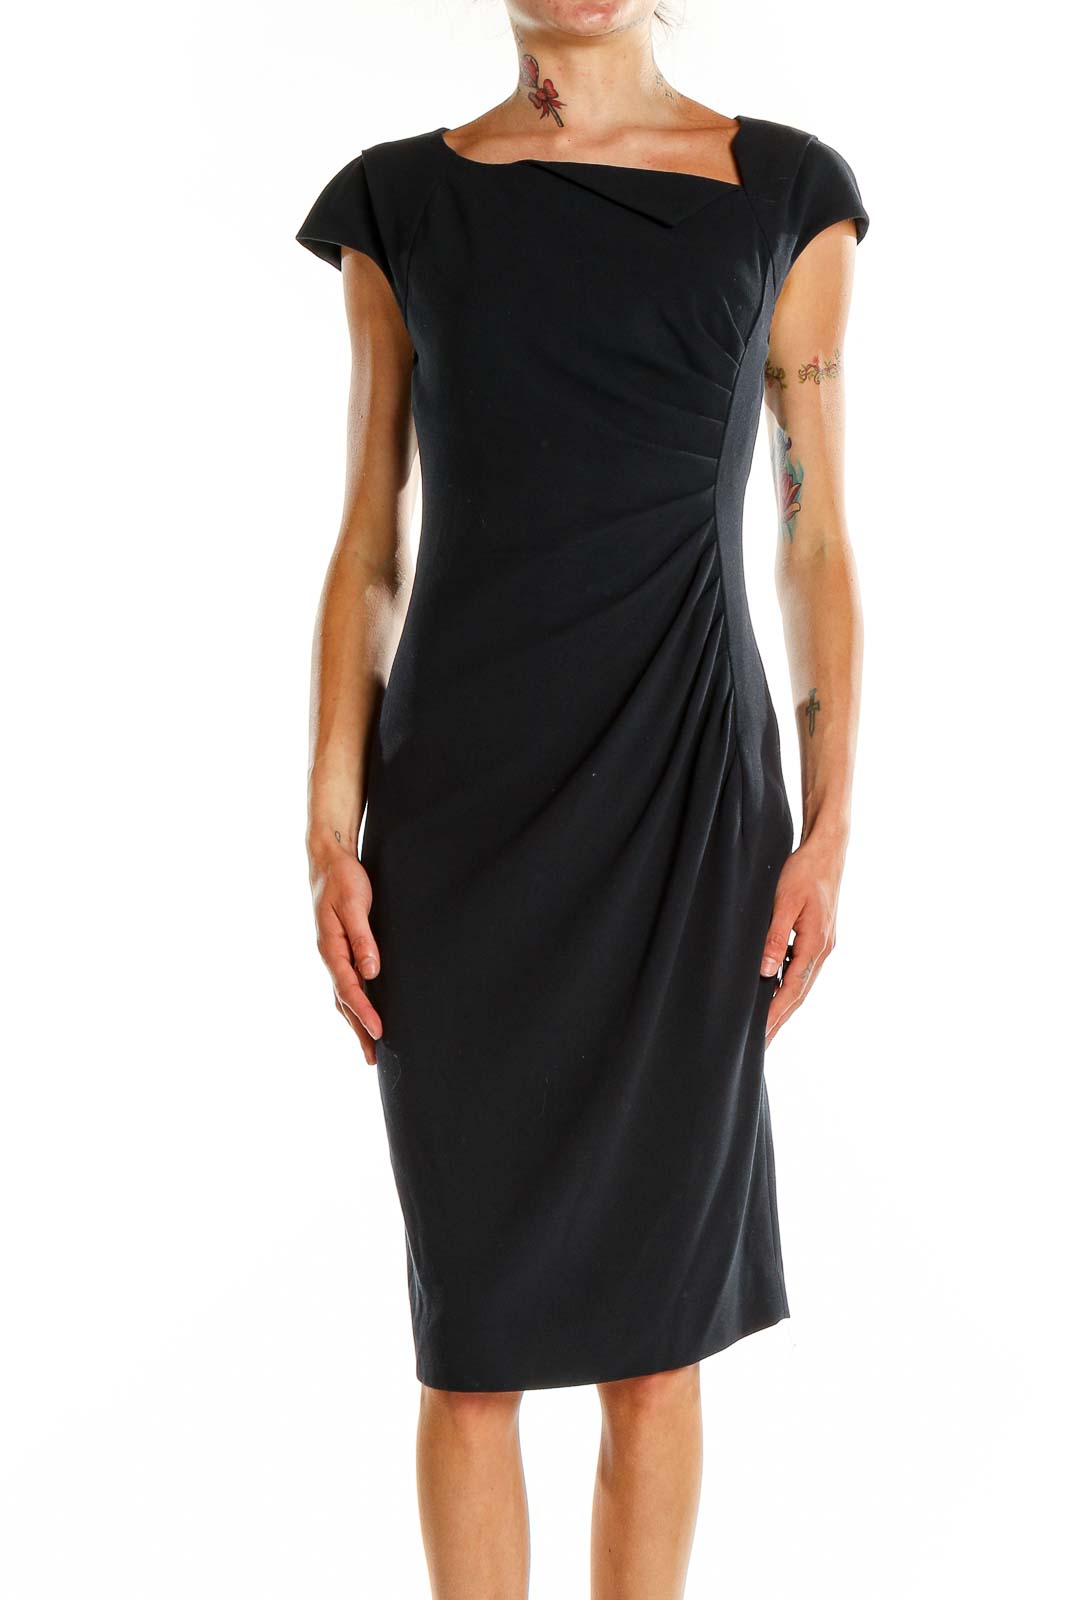 Navy Sheath Solid Work Dress Front